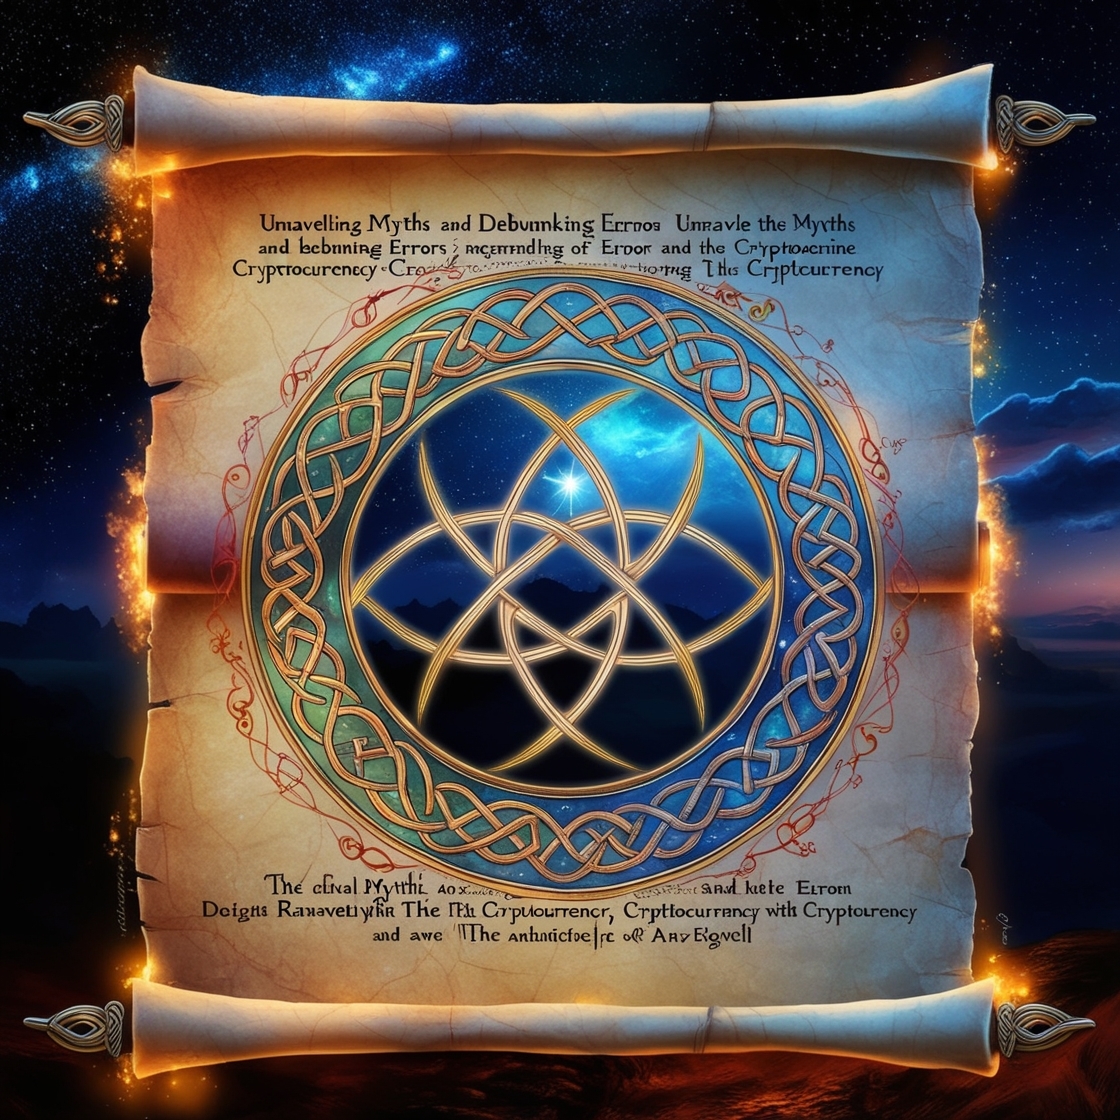 A mystical, ancient scroll, illuminated on vellum, unraveling myths and debunking errors surrounding cryptocurrency, set against a rich, starry night sky, evoking an otherworldly aura, as intricate, swirling patterns reminiscent of Celtic knotwork dance across the parchment, in hues of auroral blue and golden citrine, with touches of fiery scarlet, and subtle, luminous accents, suggesting the ethereal and the enigmatic, as if the secrets of the digital realm are being whispered by an ancient sage, bathing the viewer in an atmosphere of cryptic mystery and awe.